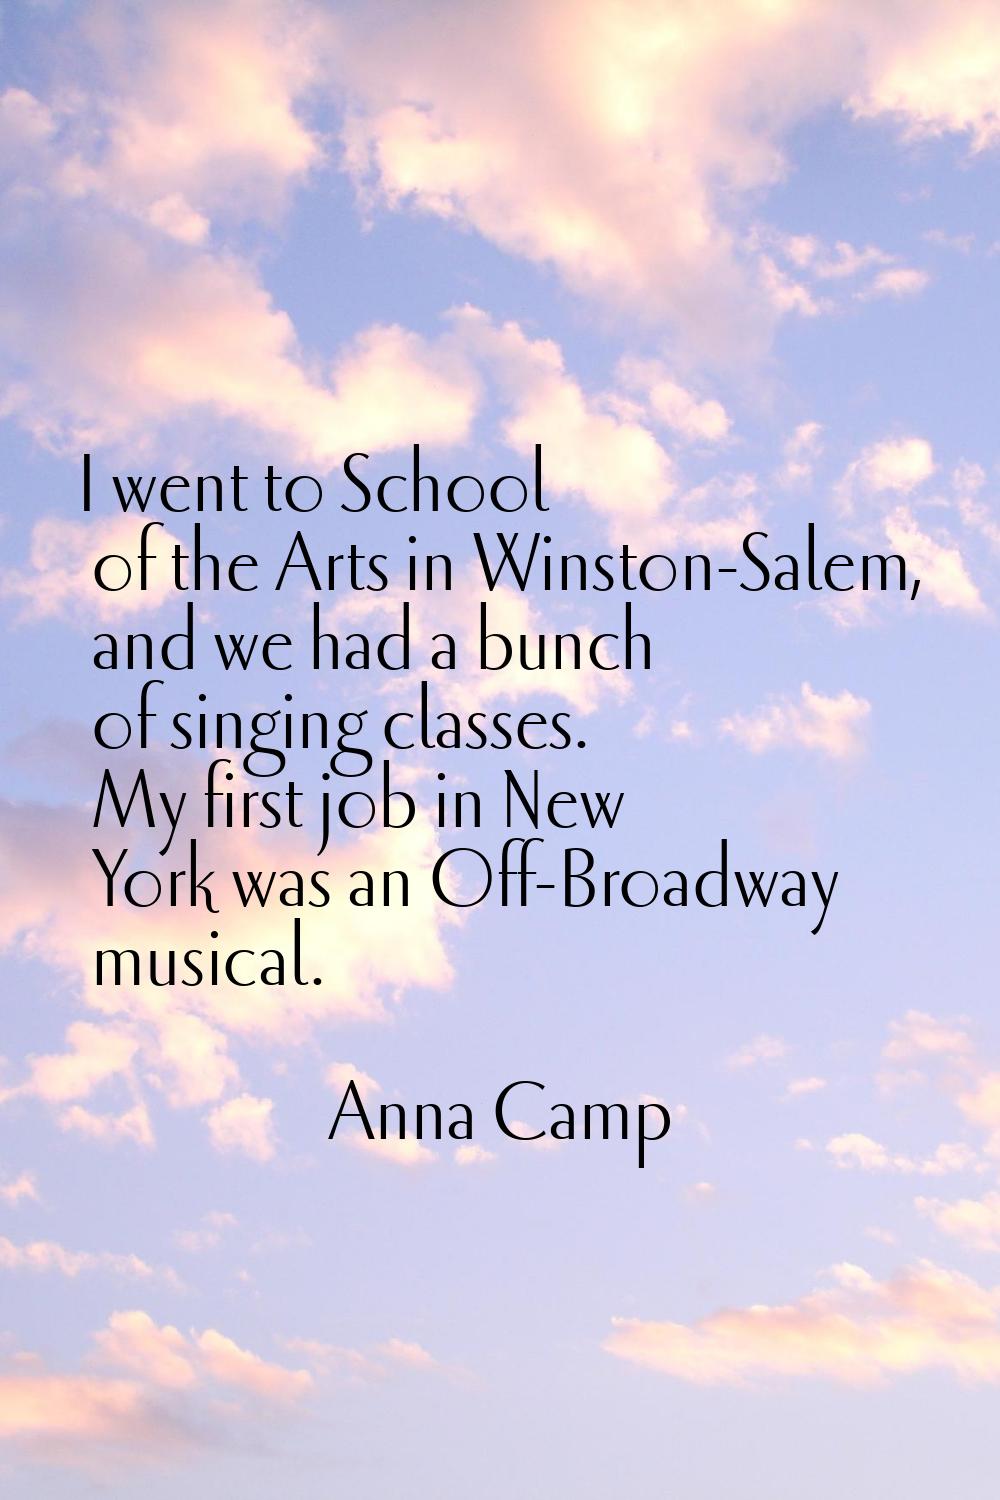 I went to School of the Arts in Winston-Salem, and we had a bunch of singing classes. My first job 